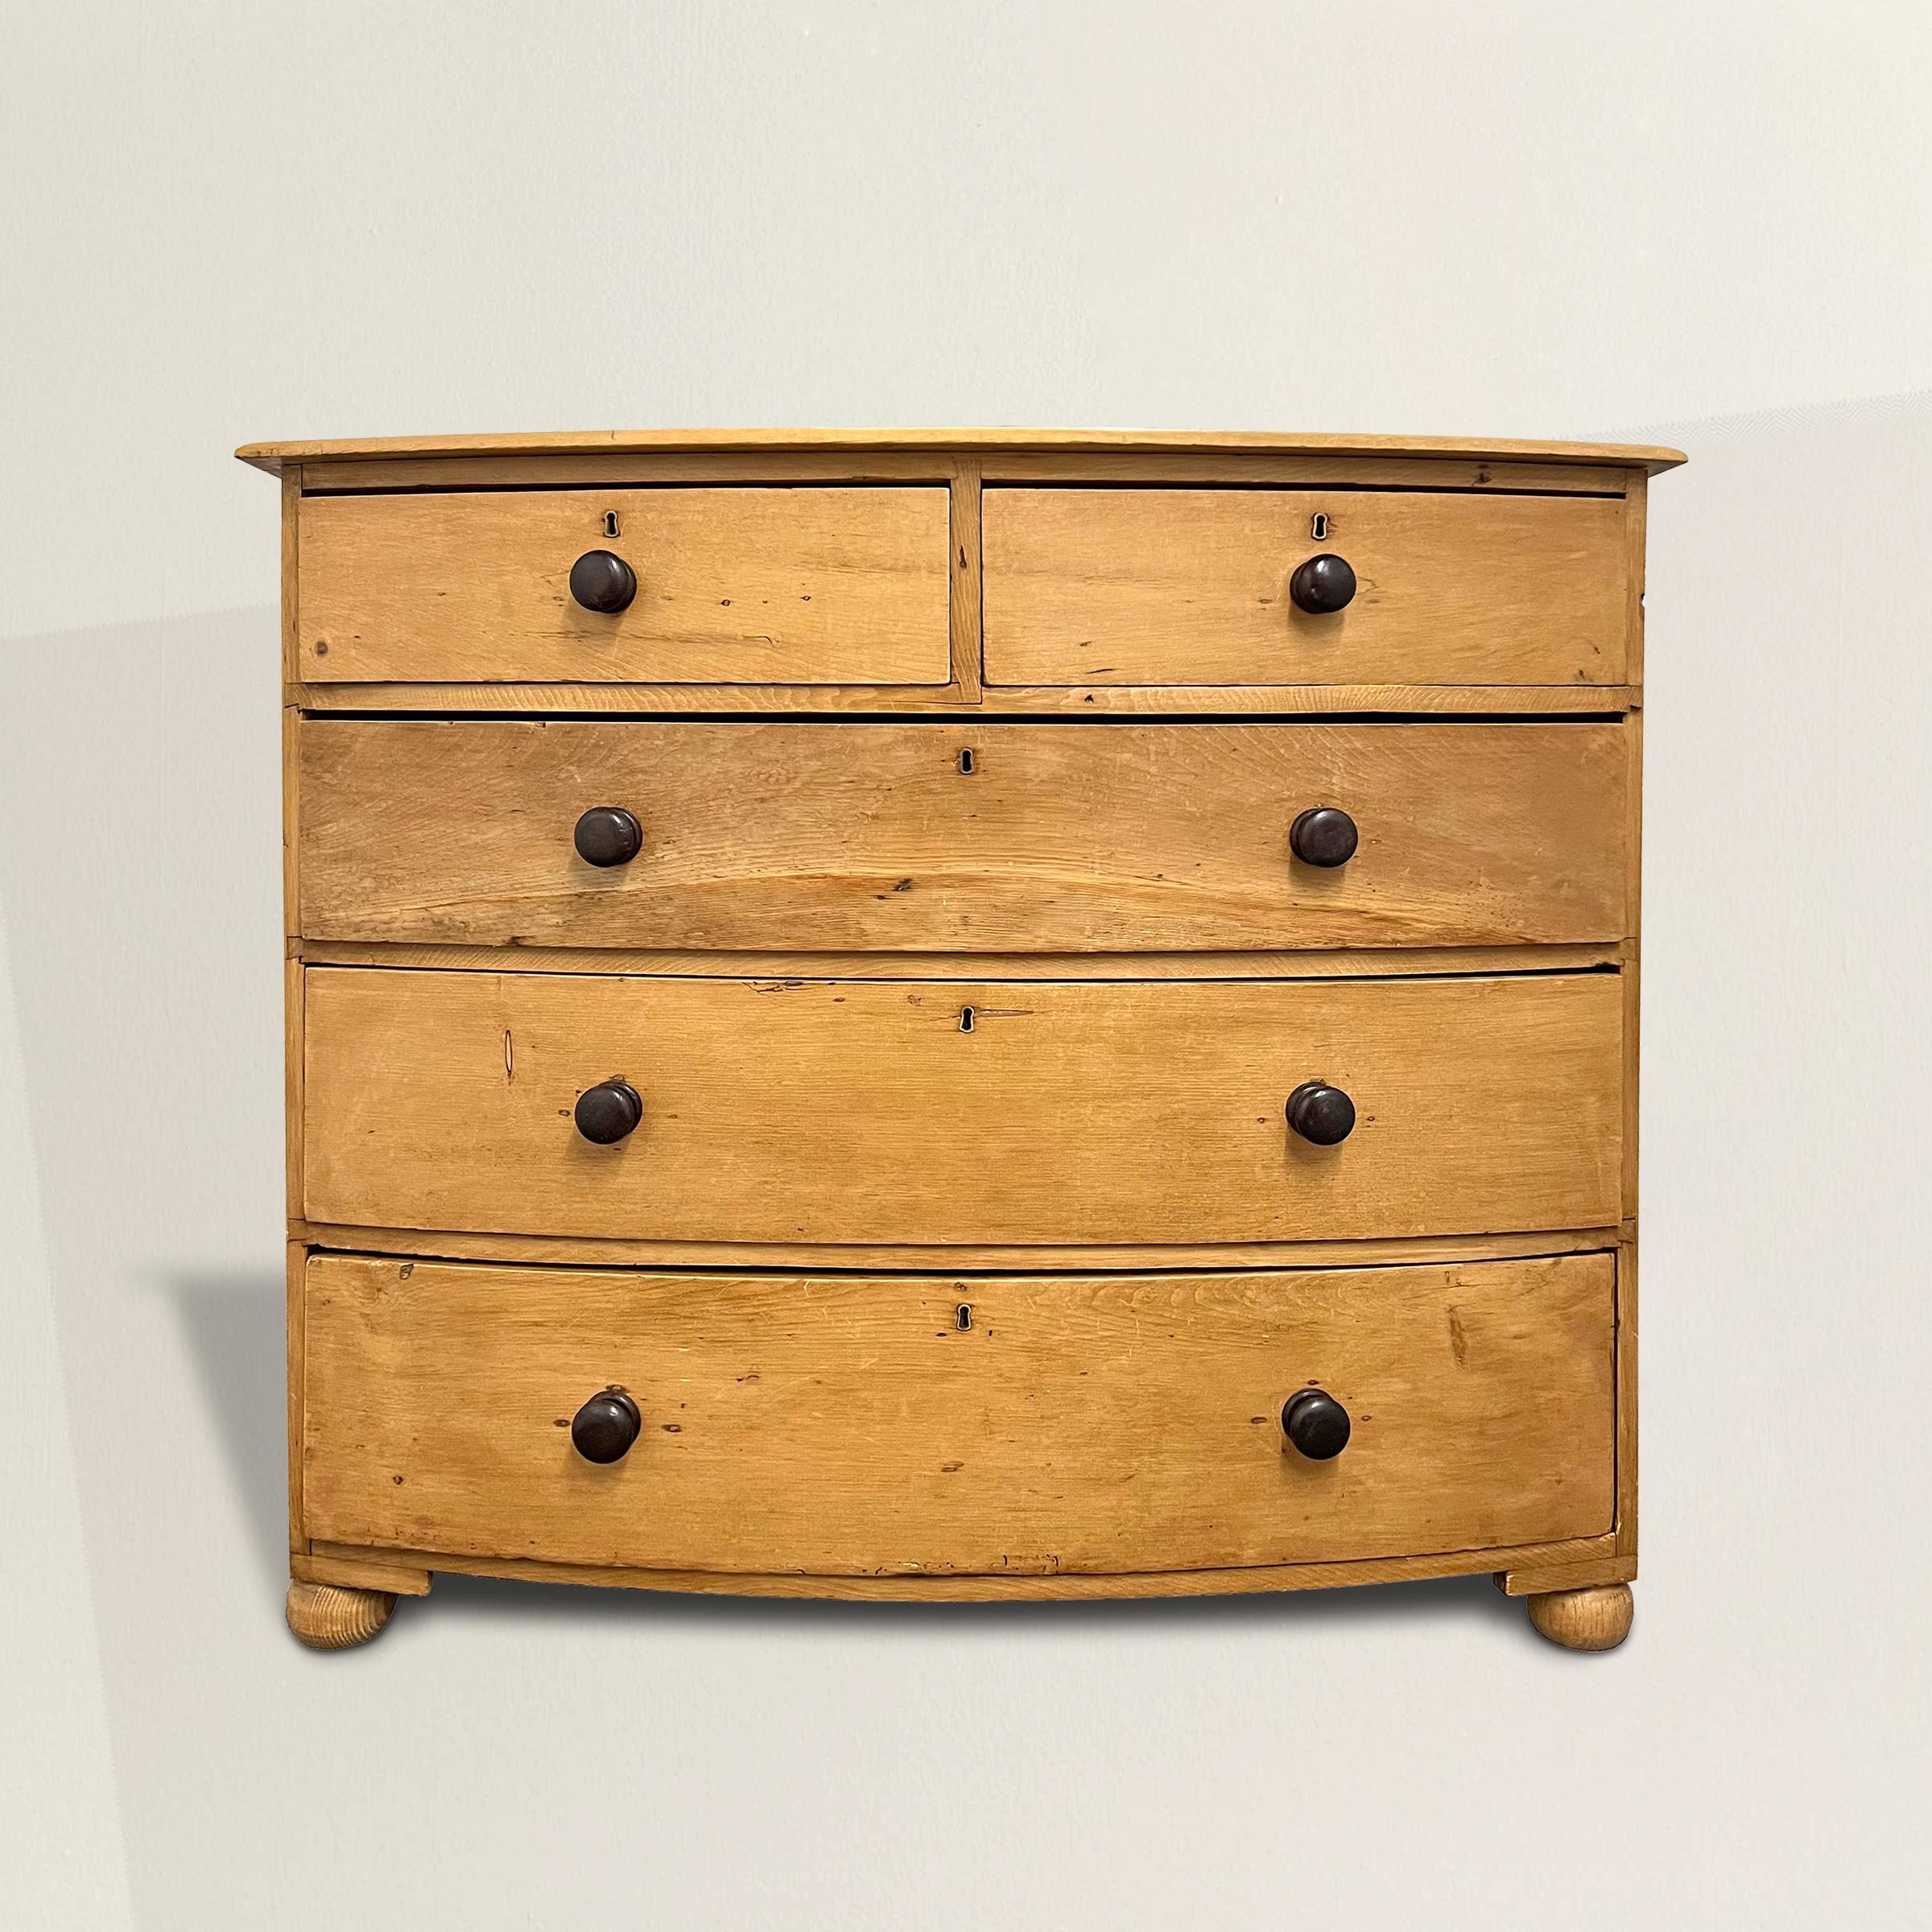 This 19th century English scrub pine bow-front chest of drawers is a remarkable example of English country furniture. With a charming two over three configuration, it offers practical storage and a distinctive aesthetic. The dark stained maple knobs